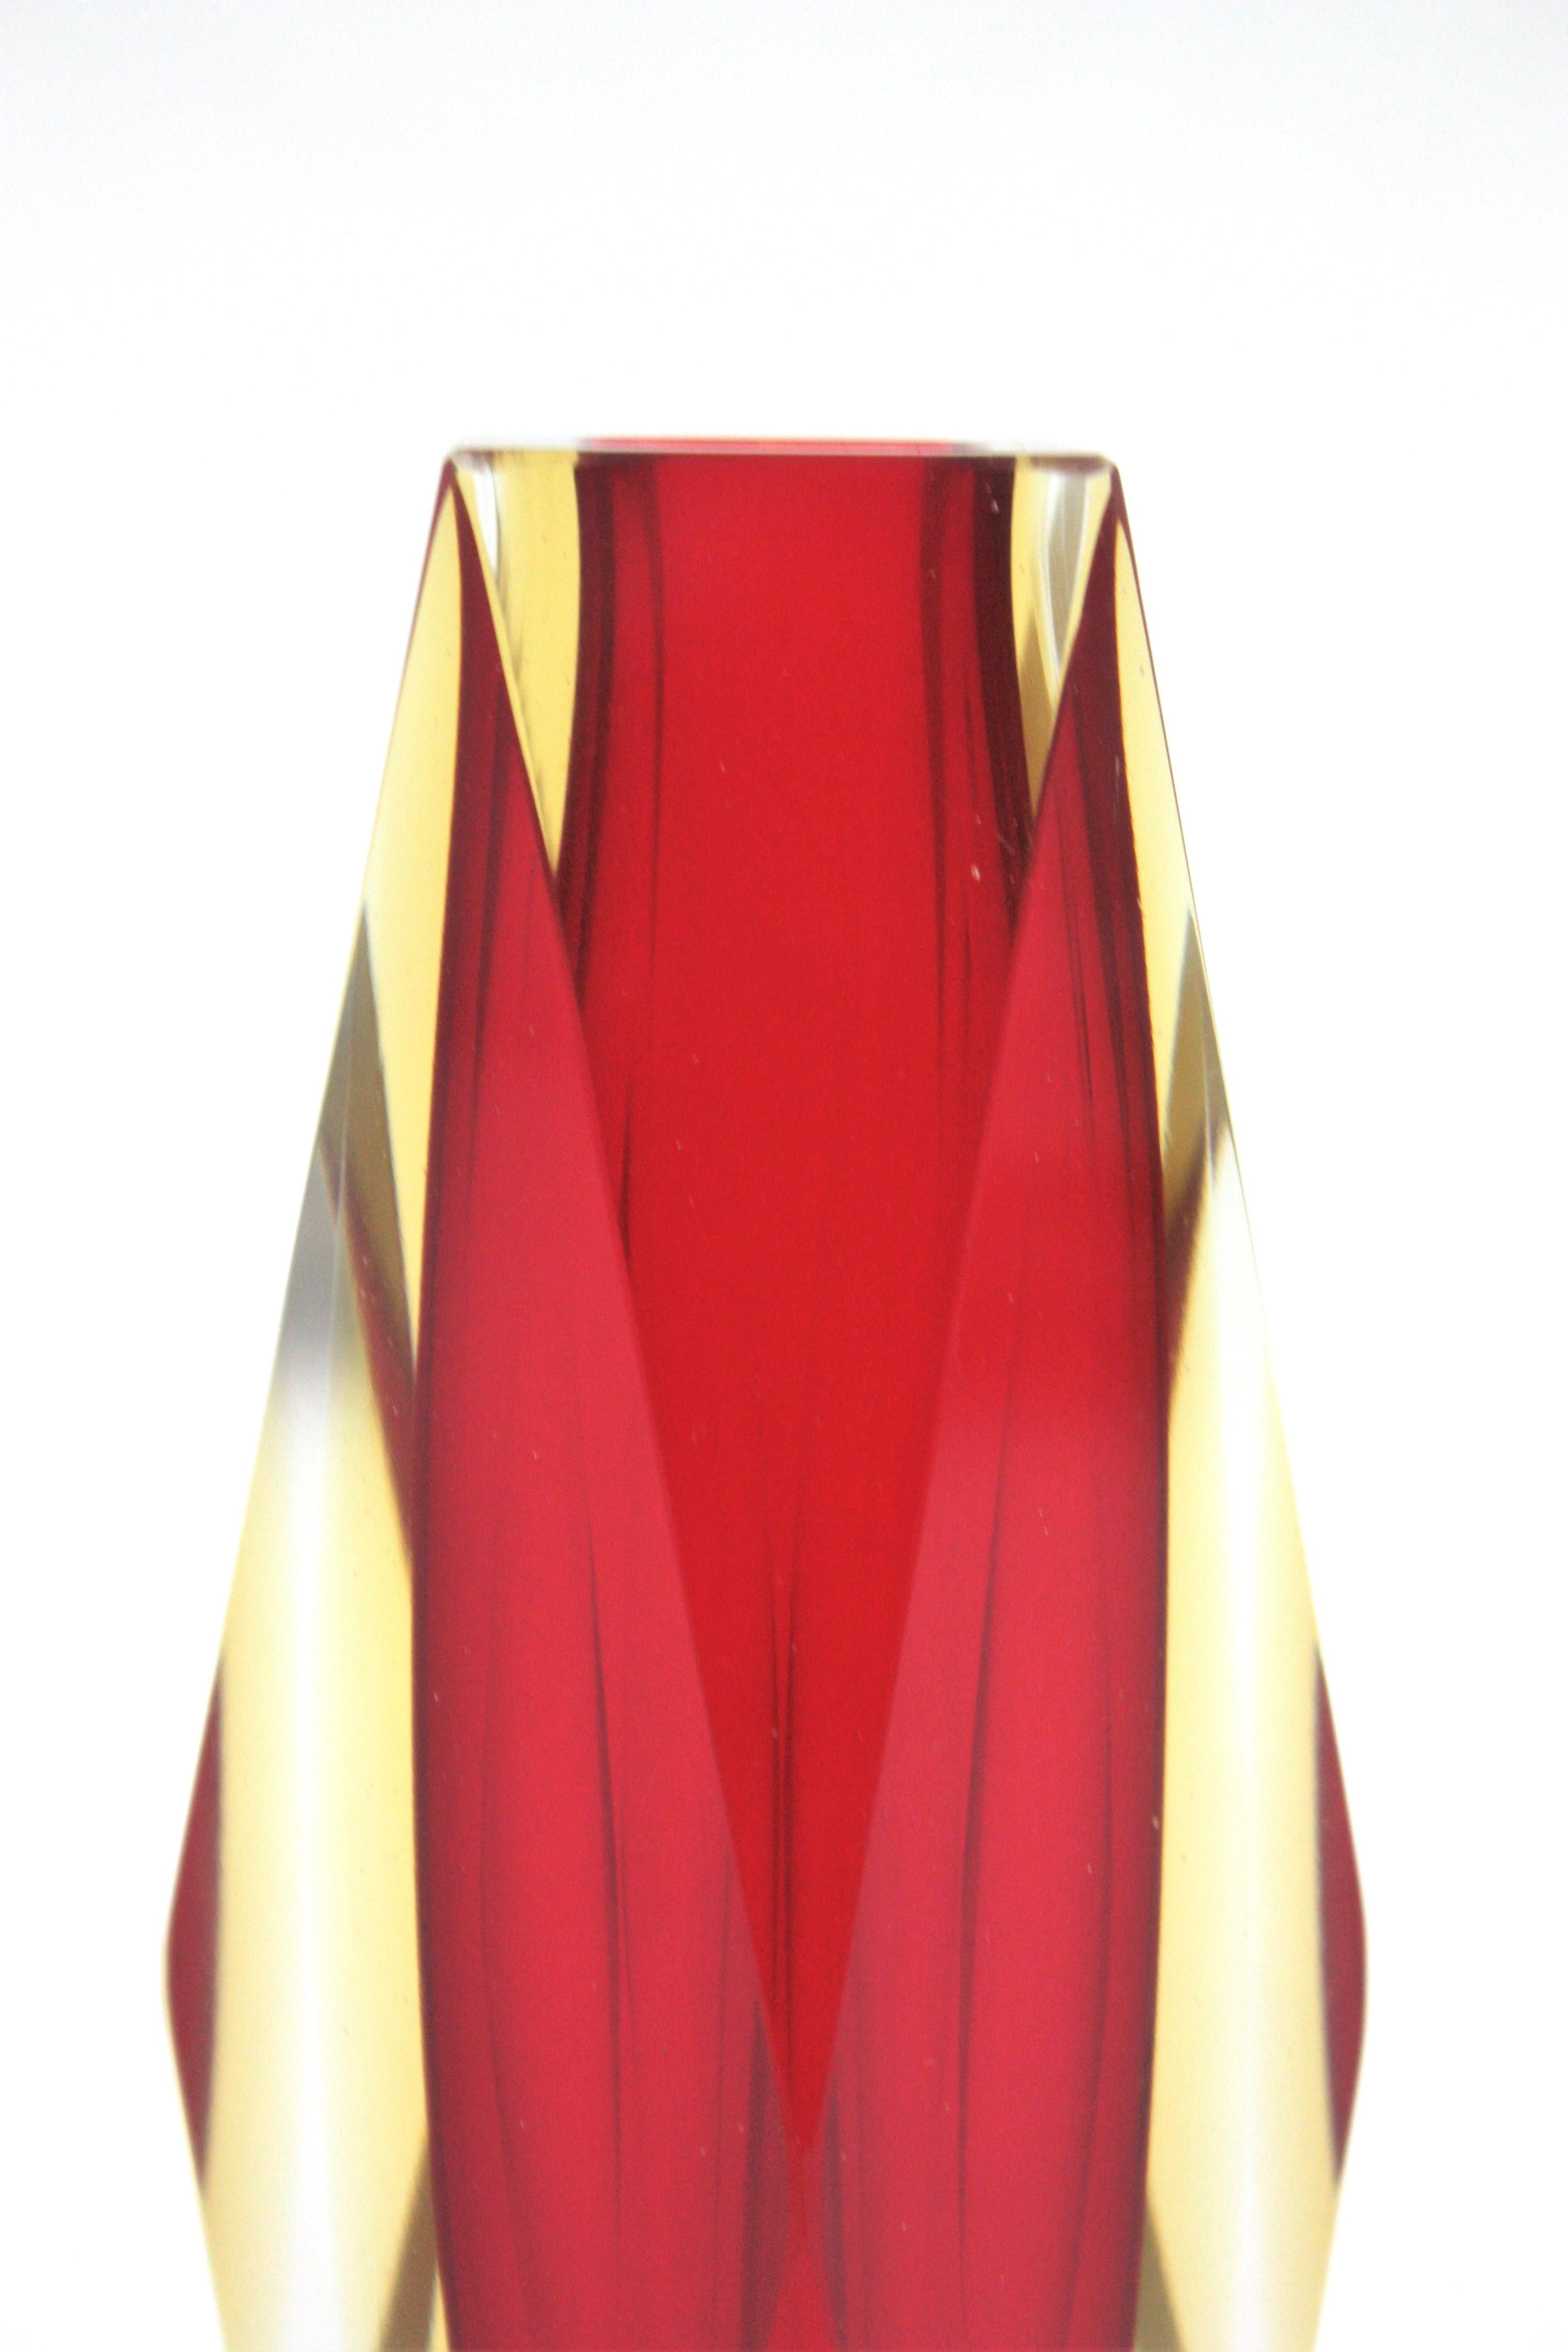 Italian Mandruzzato Murano Faceted Sommerso Red and Yellow Art Glass Vase For Sale